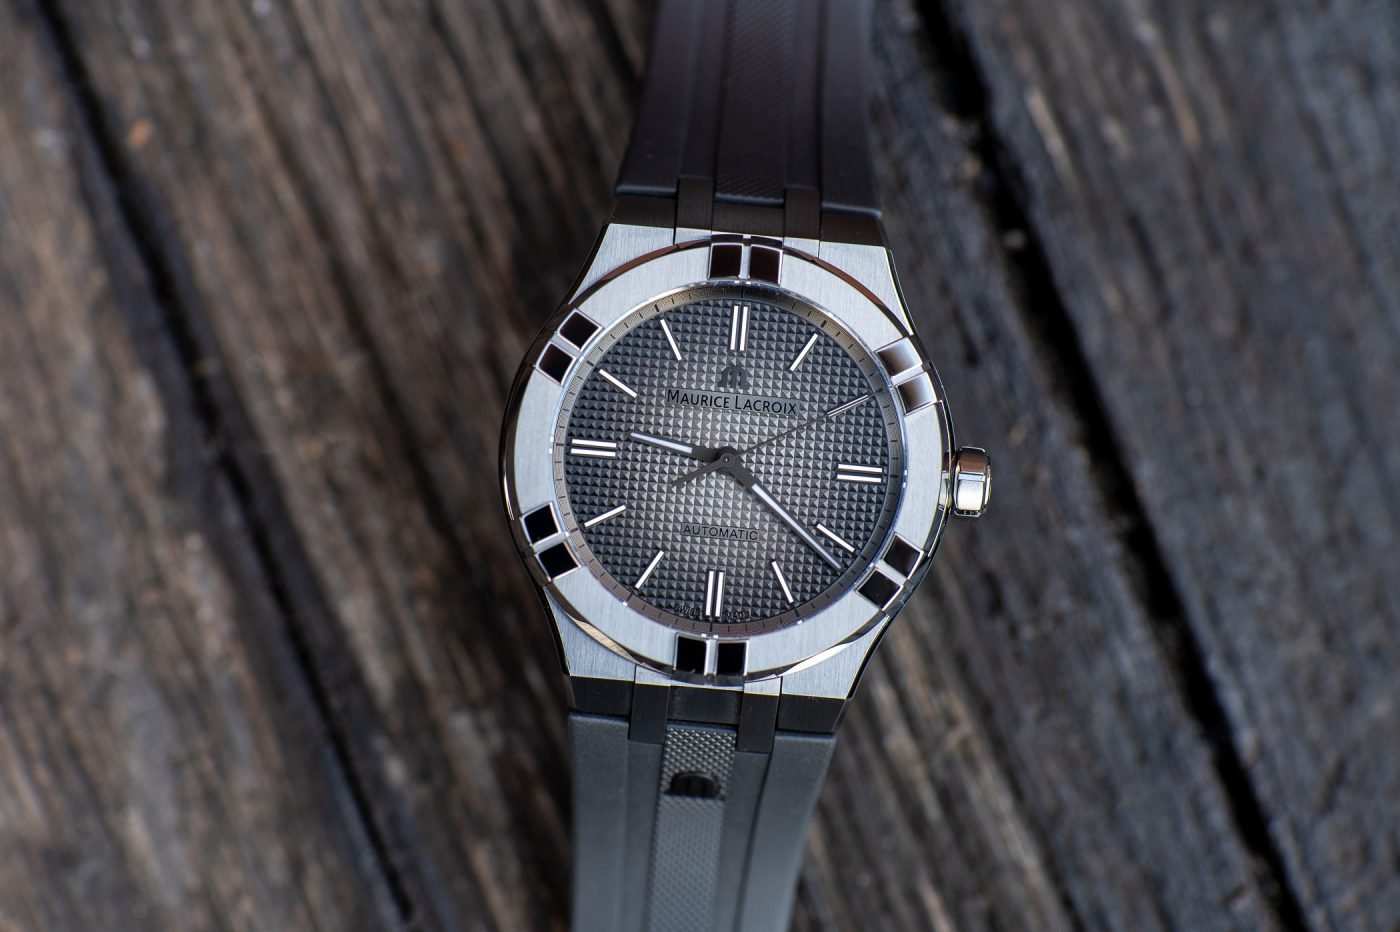 Maurice Lacroix Aikon Gunmetal PVD Limited Edition